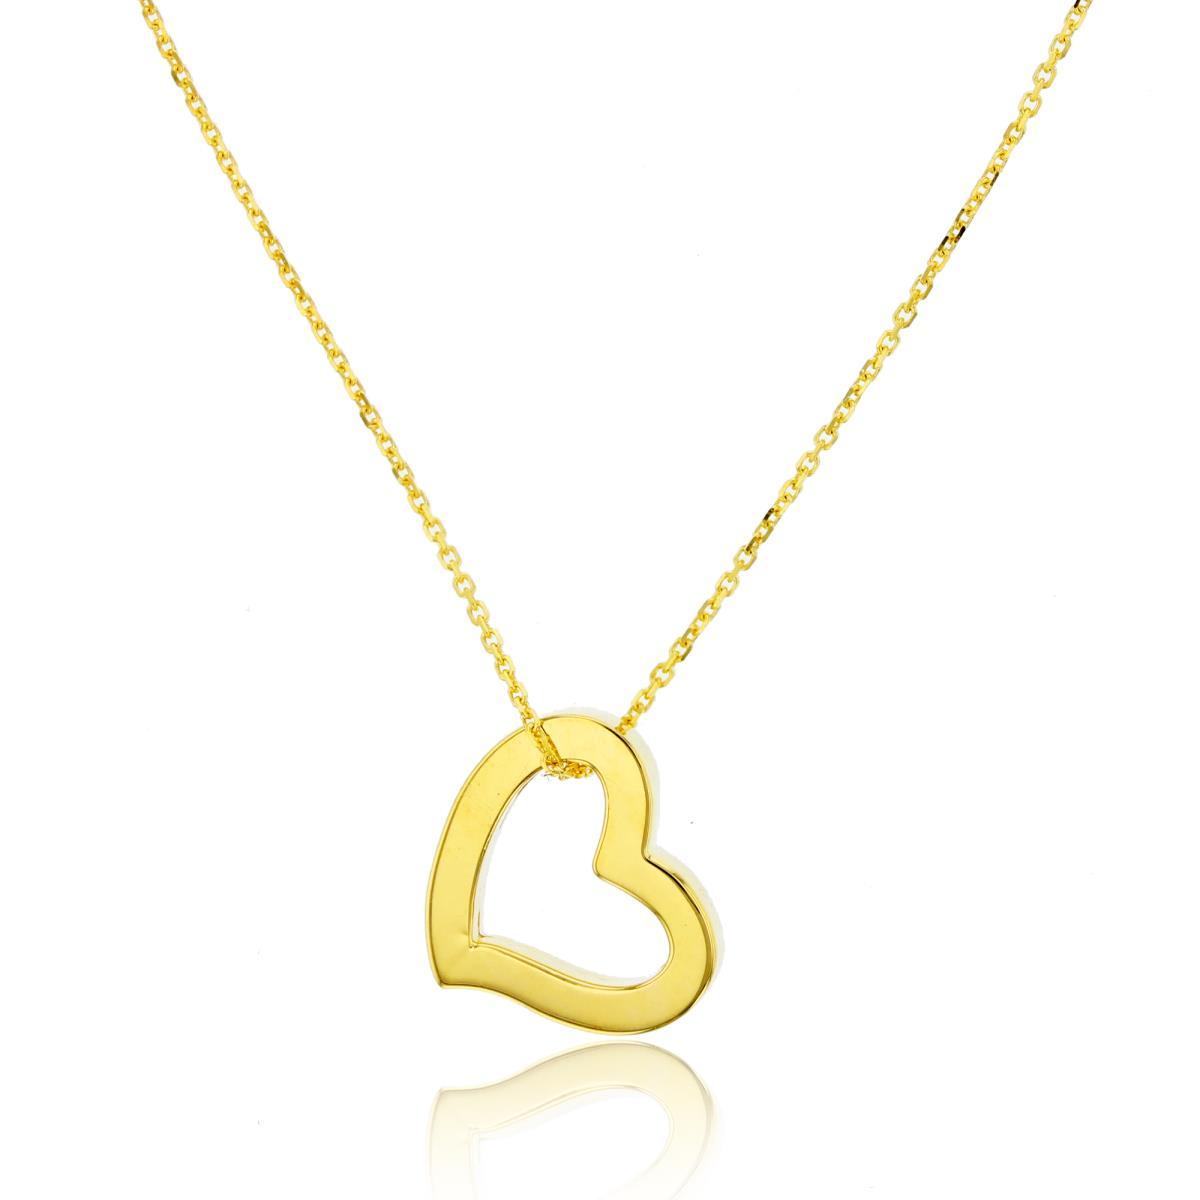 14K Yellow Gold 17" Cable Chain With Heart Pendant Necklace